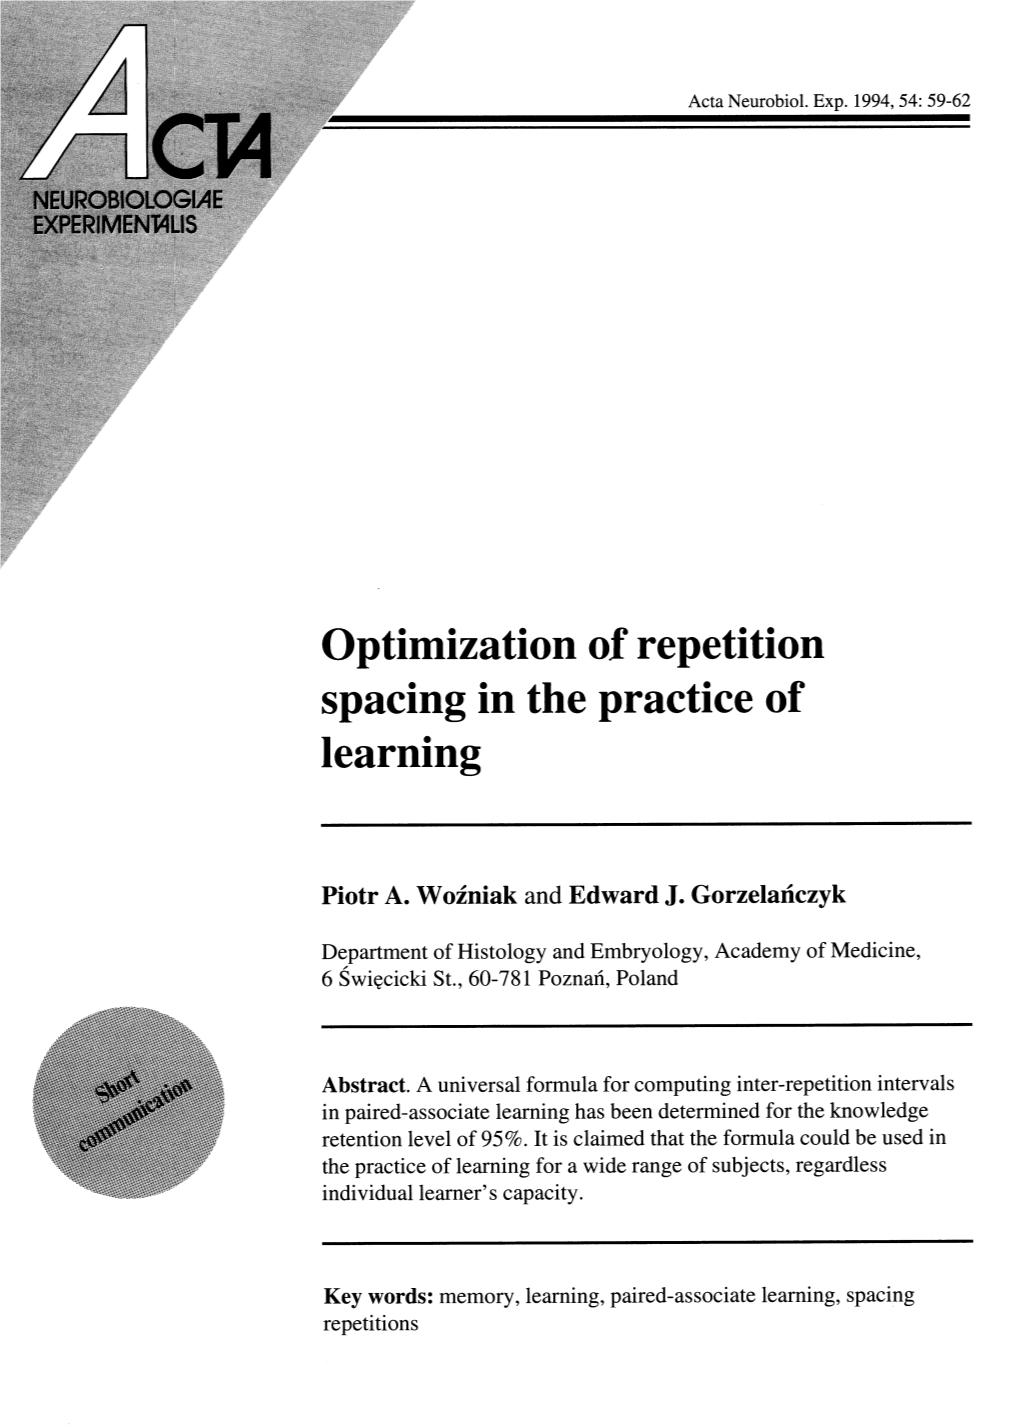 Optimization of Repetition Spacing in the Practice of Learning